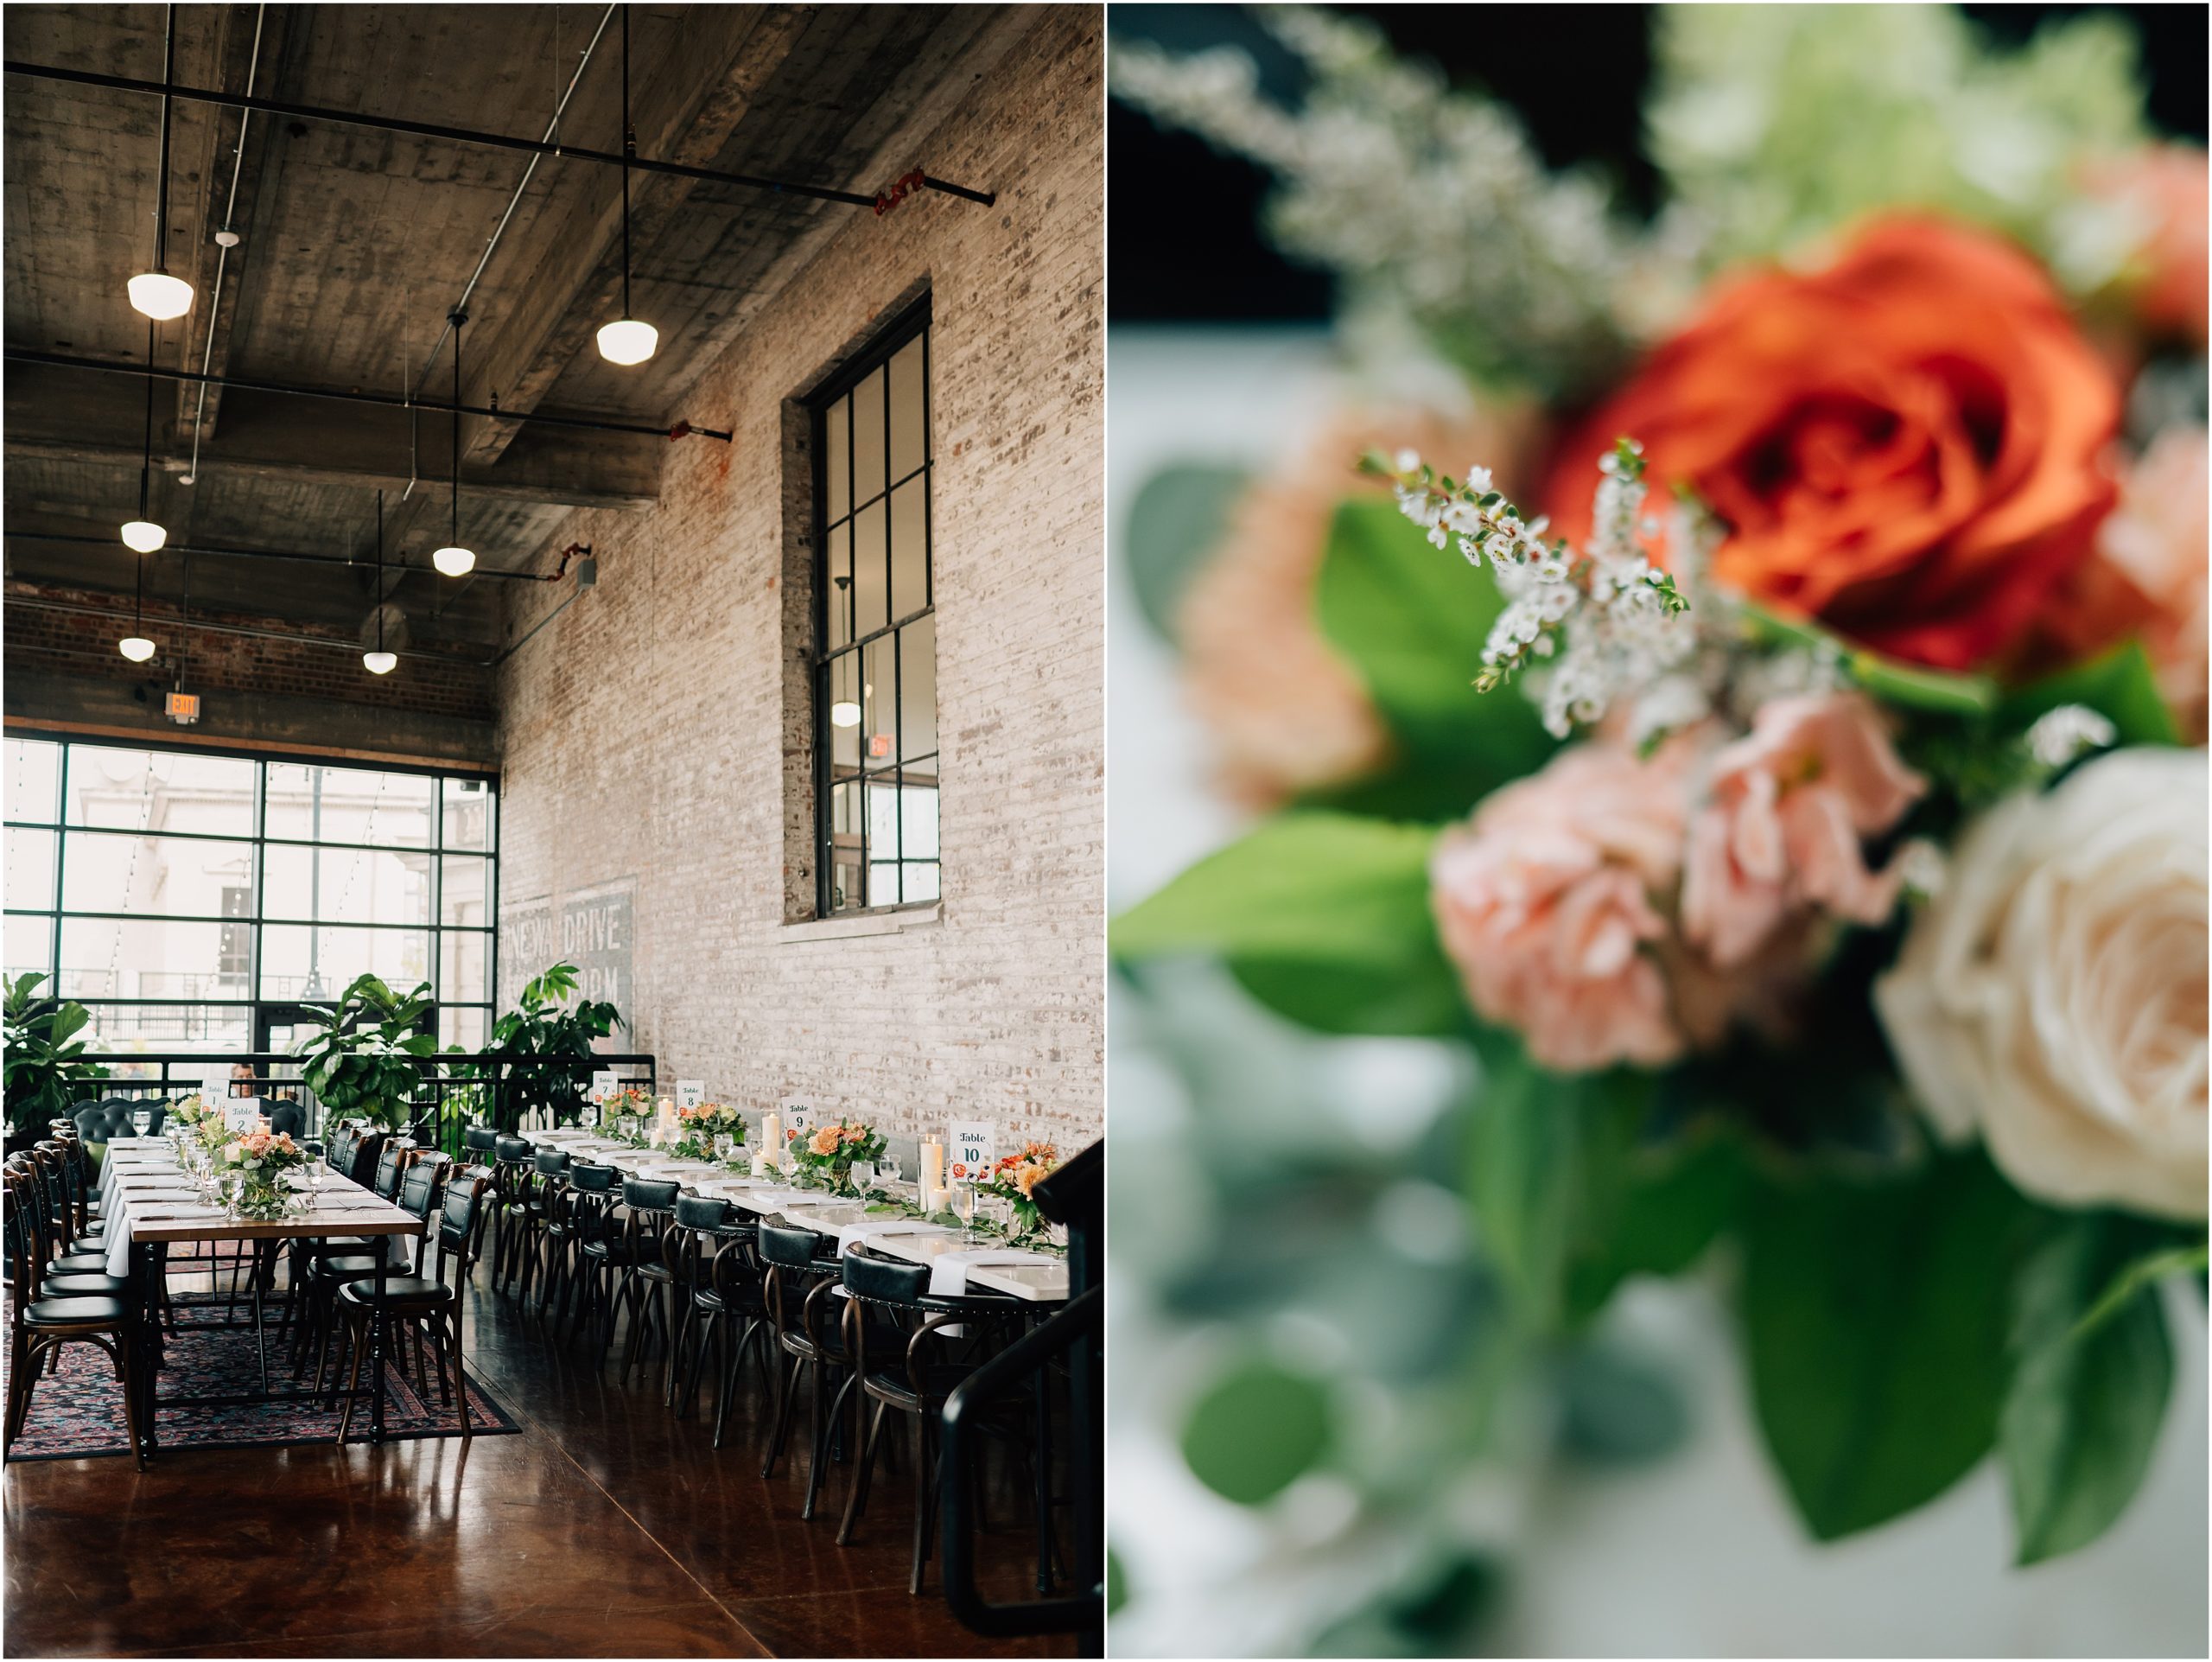 Cafe Postale serves as the perfect wedding venue in omaha NE for this simple and colorful wedding. Peach and burnt orange florals with brick walls. Photo by Anna Brace, who specializes in Omaha Nebraska Wedding Photography. 